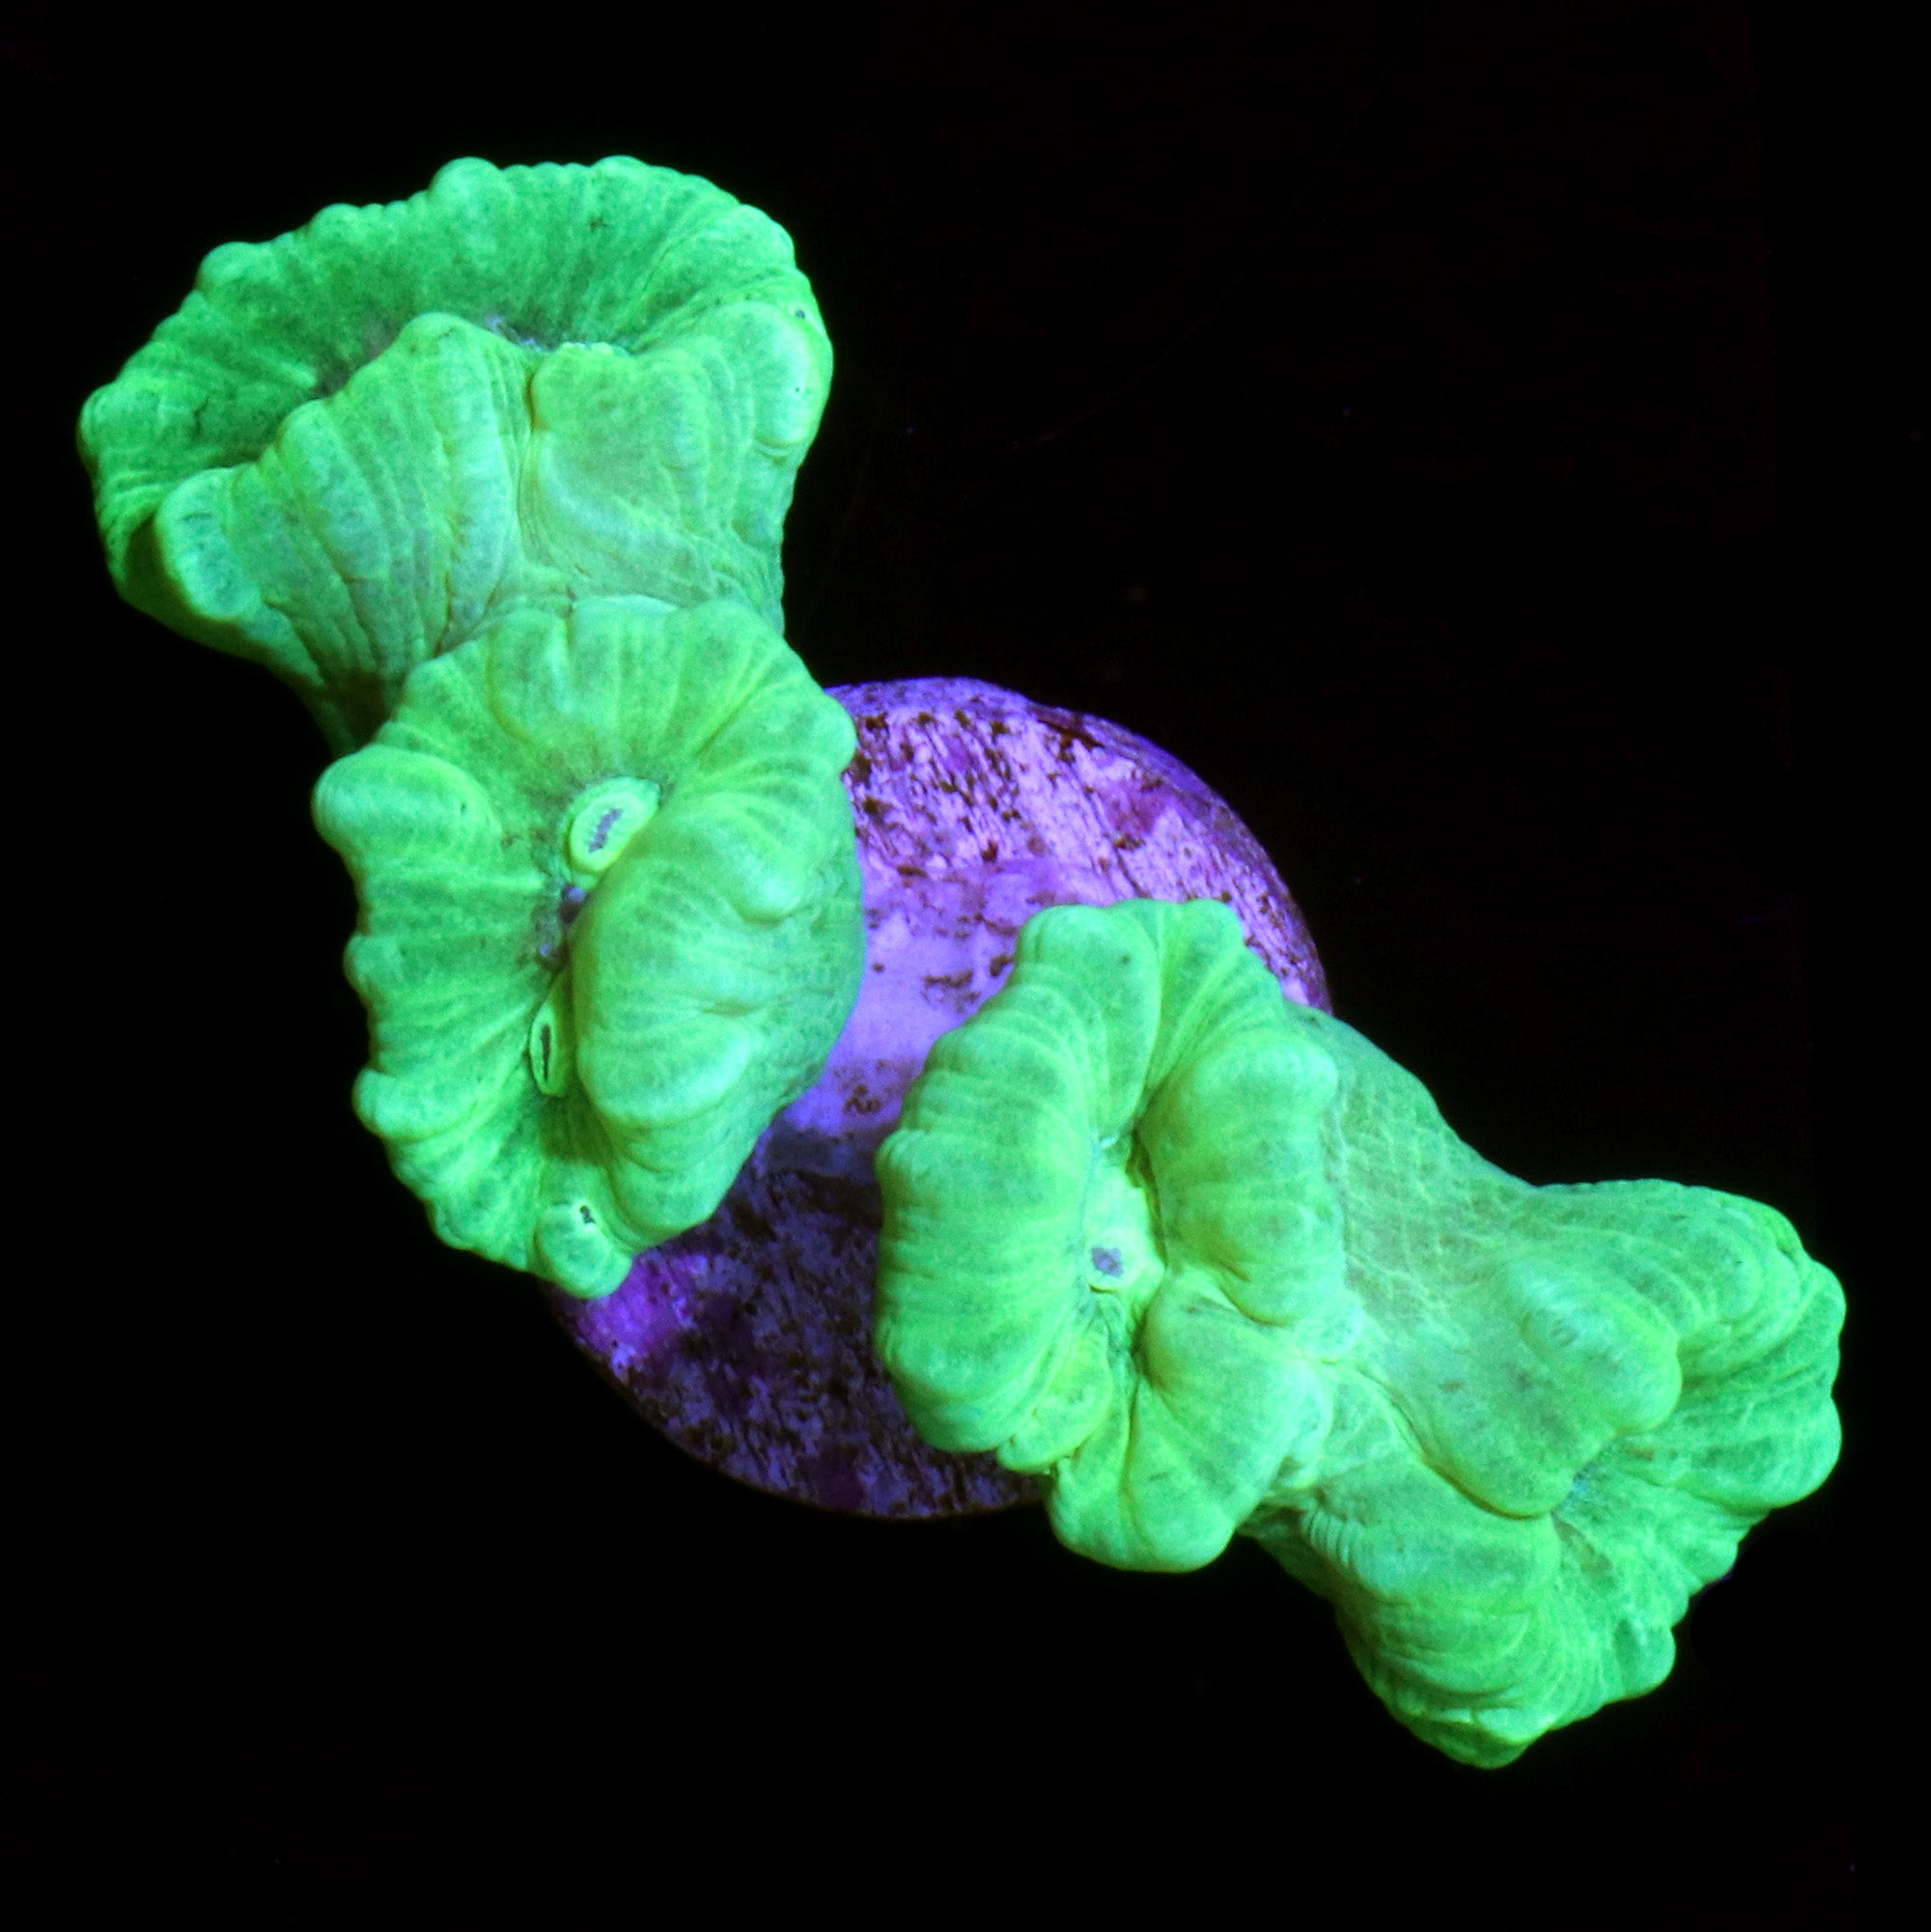 Kryptonite Candy Cane Coral | Buy Live Coral for Sale | Vivid